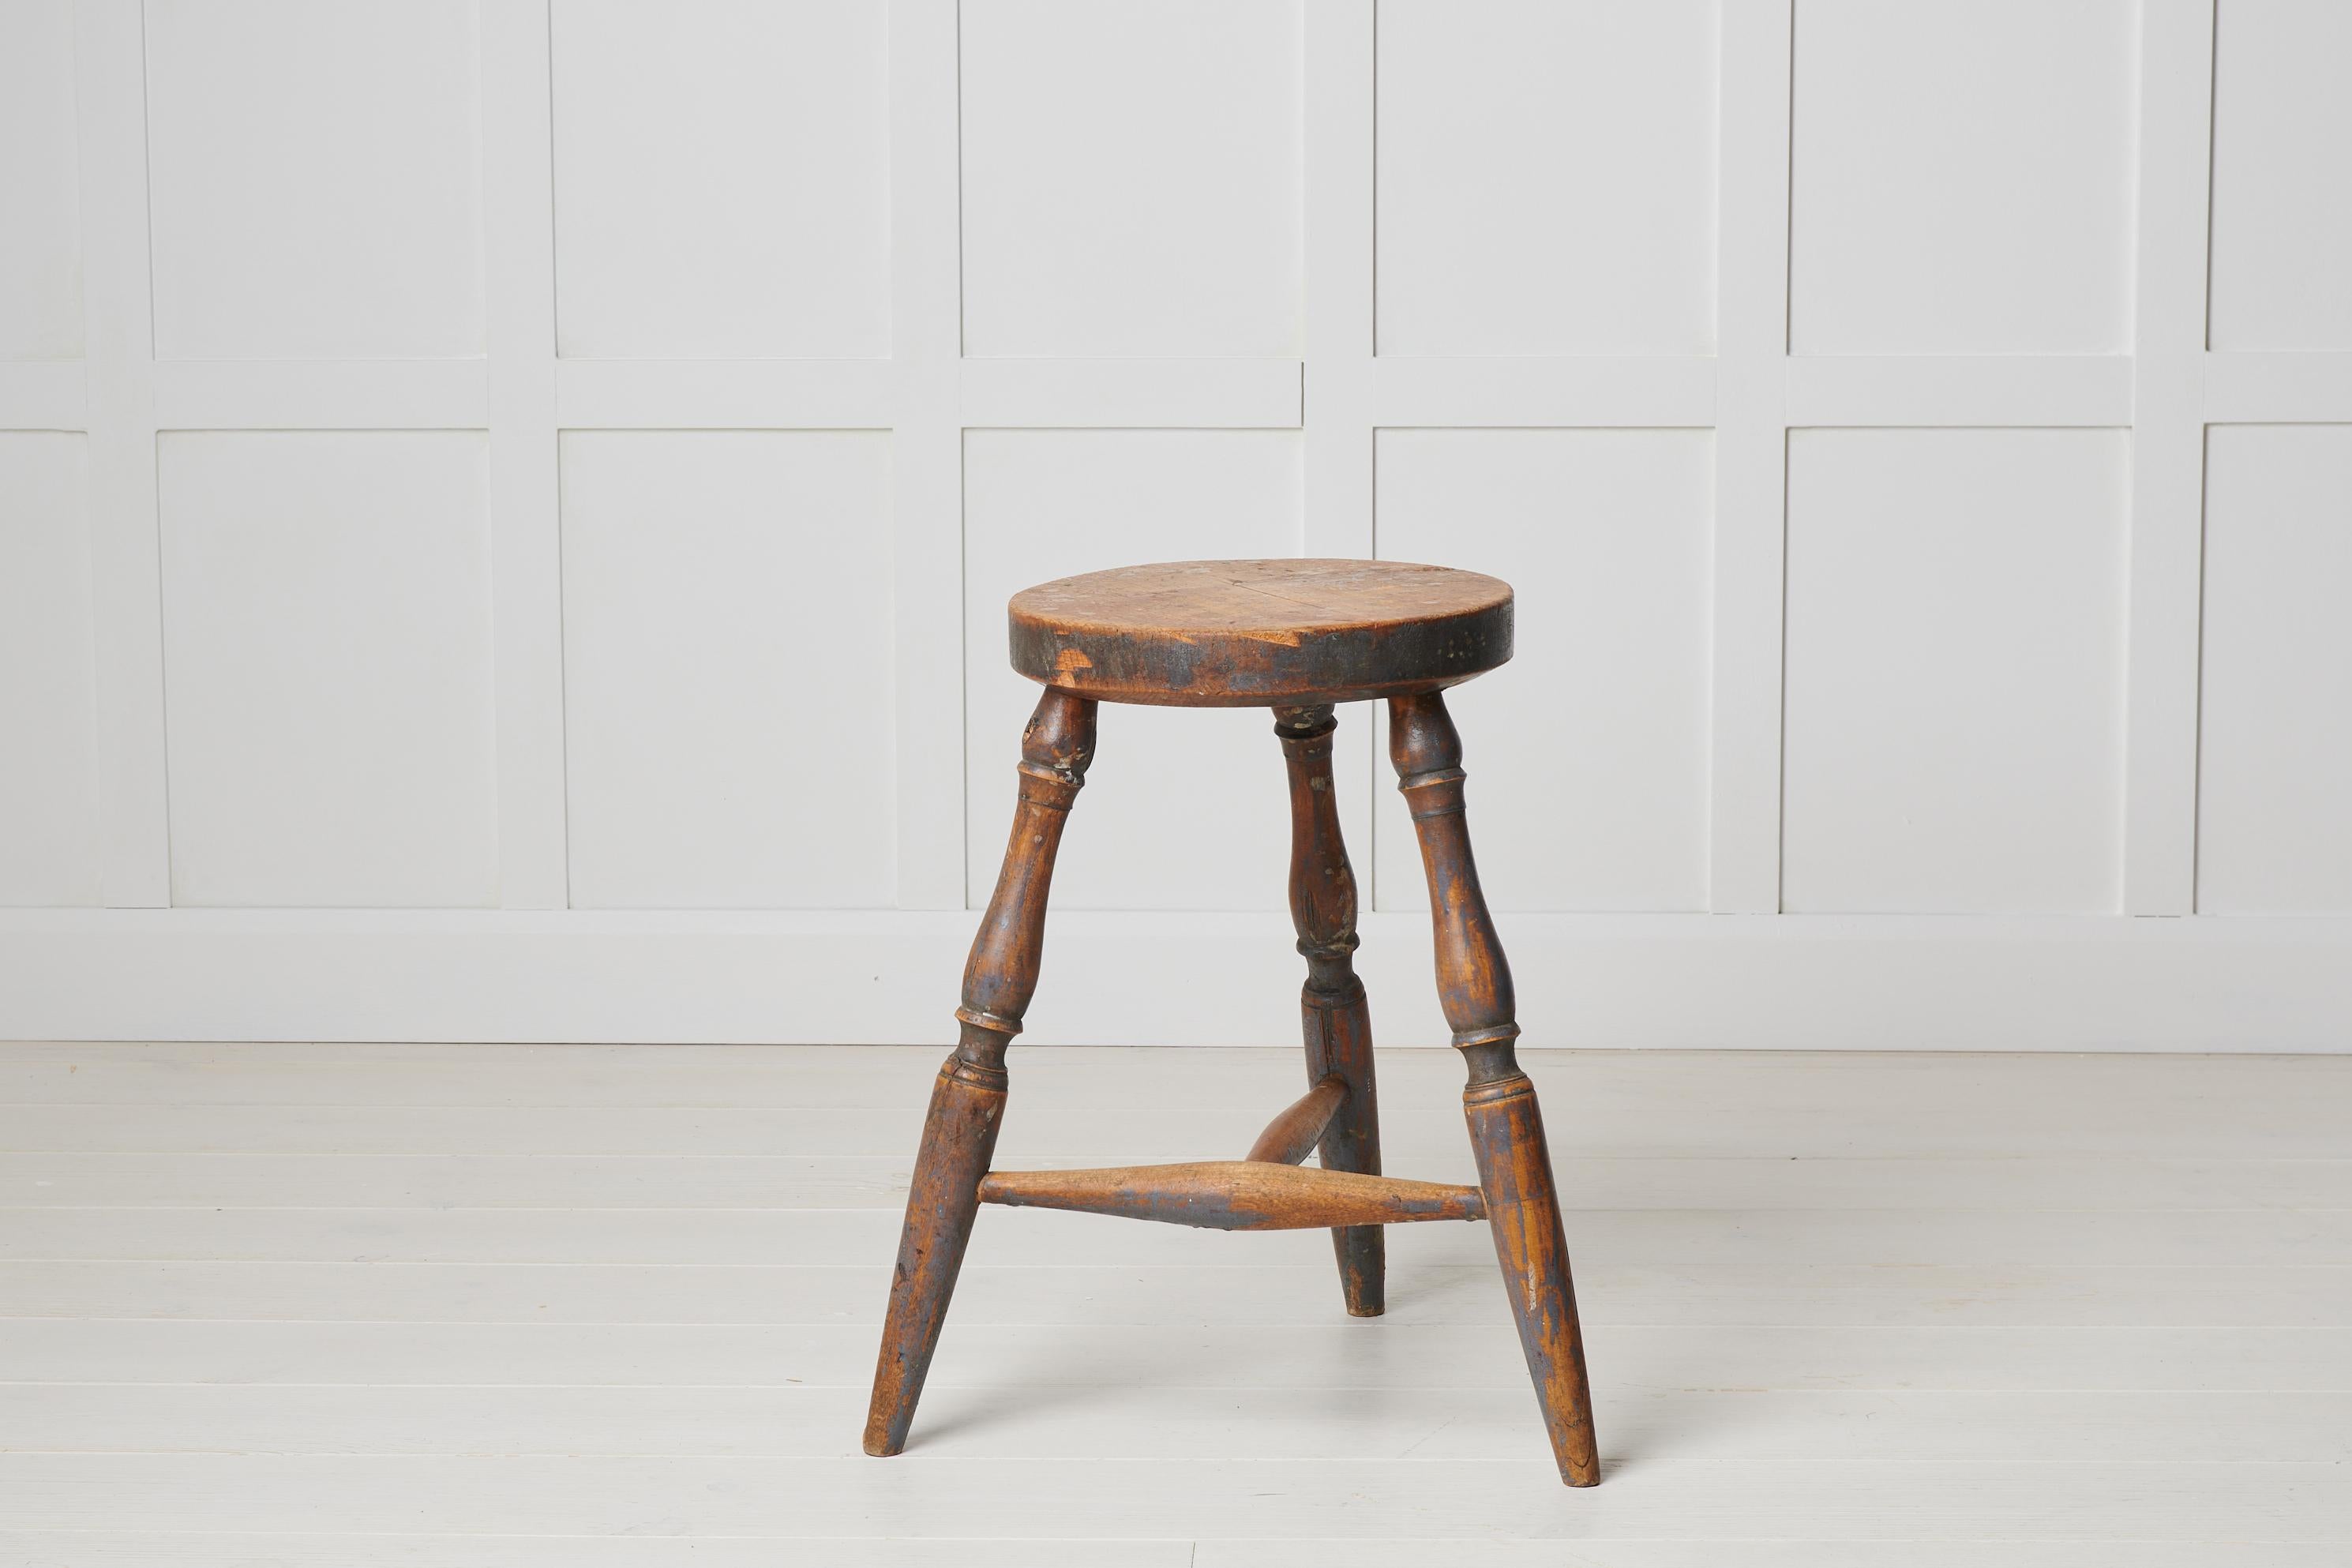 Antique Swedish country stool in folk art made with three legs. This stool is from northern Sweden and made around the 1860s. Older stools are commonly found to have only three legs, this because it was easier to make them stand stable on floors